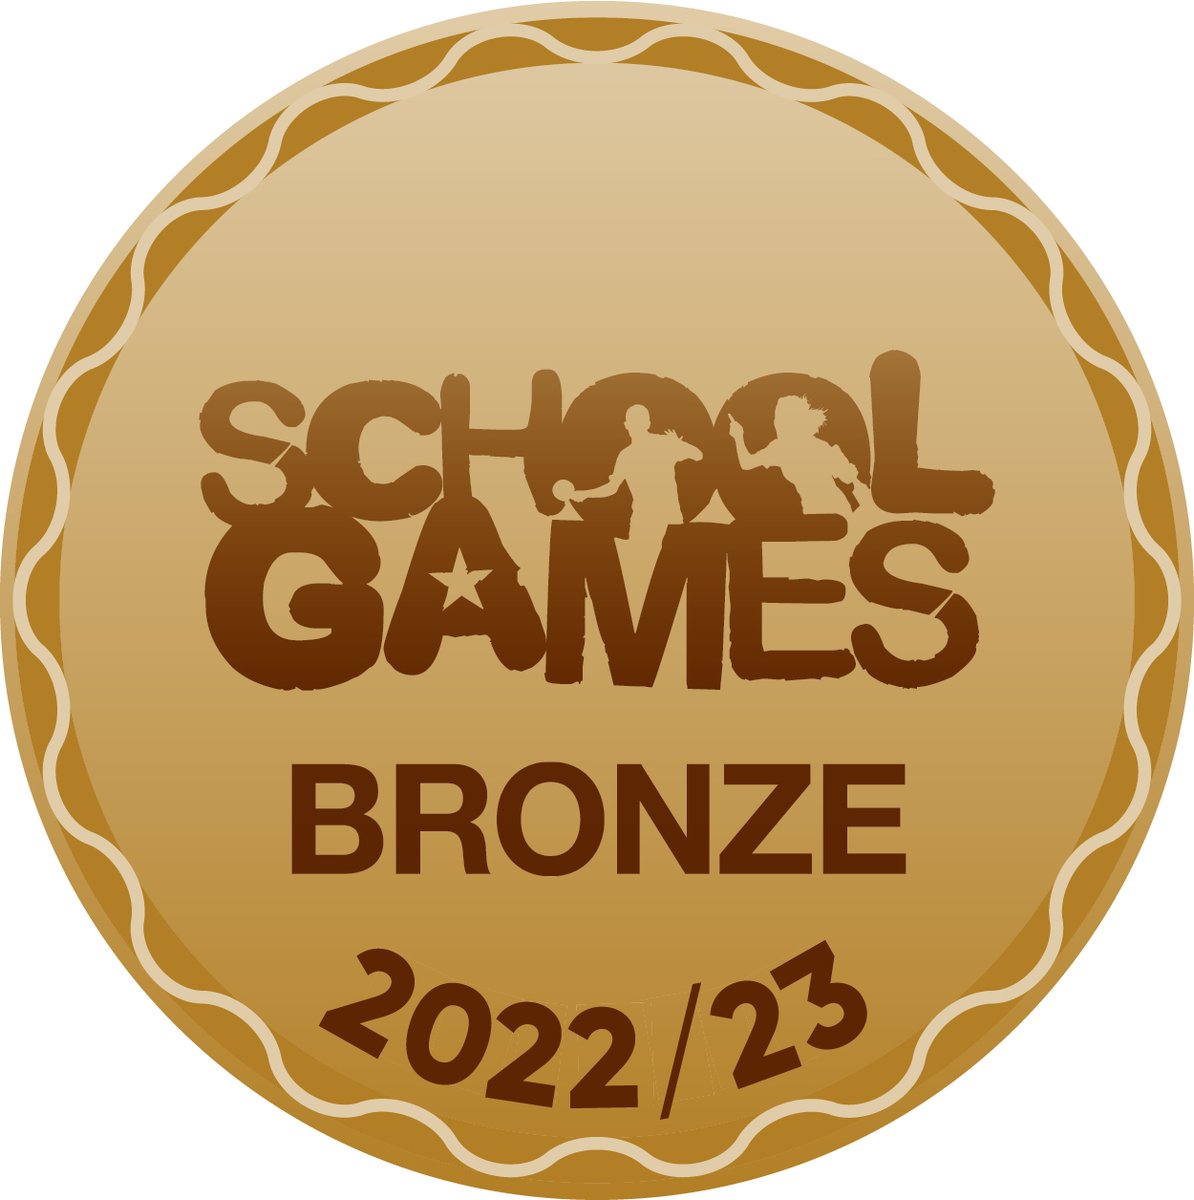 Well done to @KensworthCE for achieving Bronze award, it was great to sit down together & planning towards the future. Well done to everyone at Kensworth were back on track. @YourSchoolGames